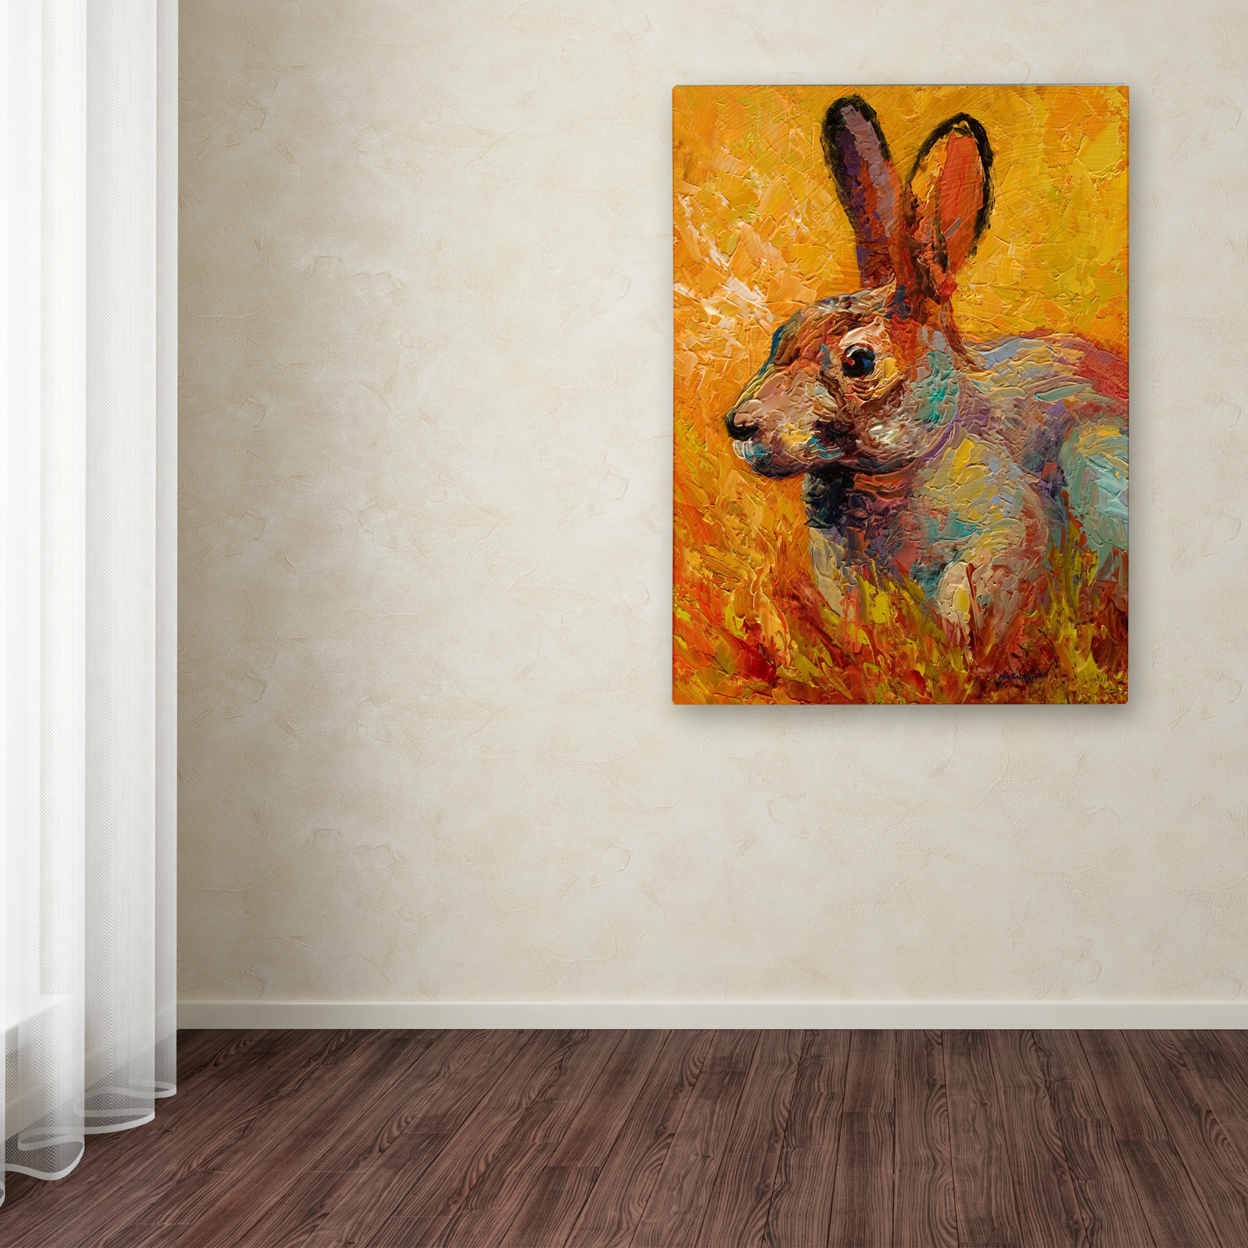 Marion Rose 'Rabbit III' Ready To Hang Canvas Art 18 X 24 Inches Made In USA